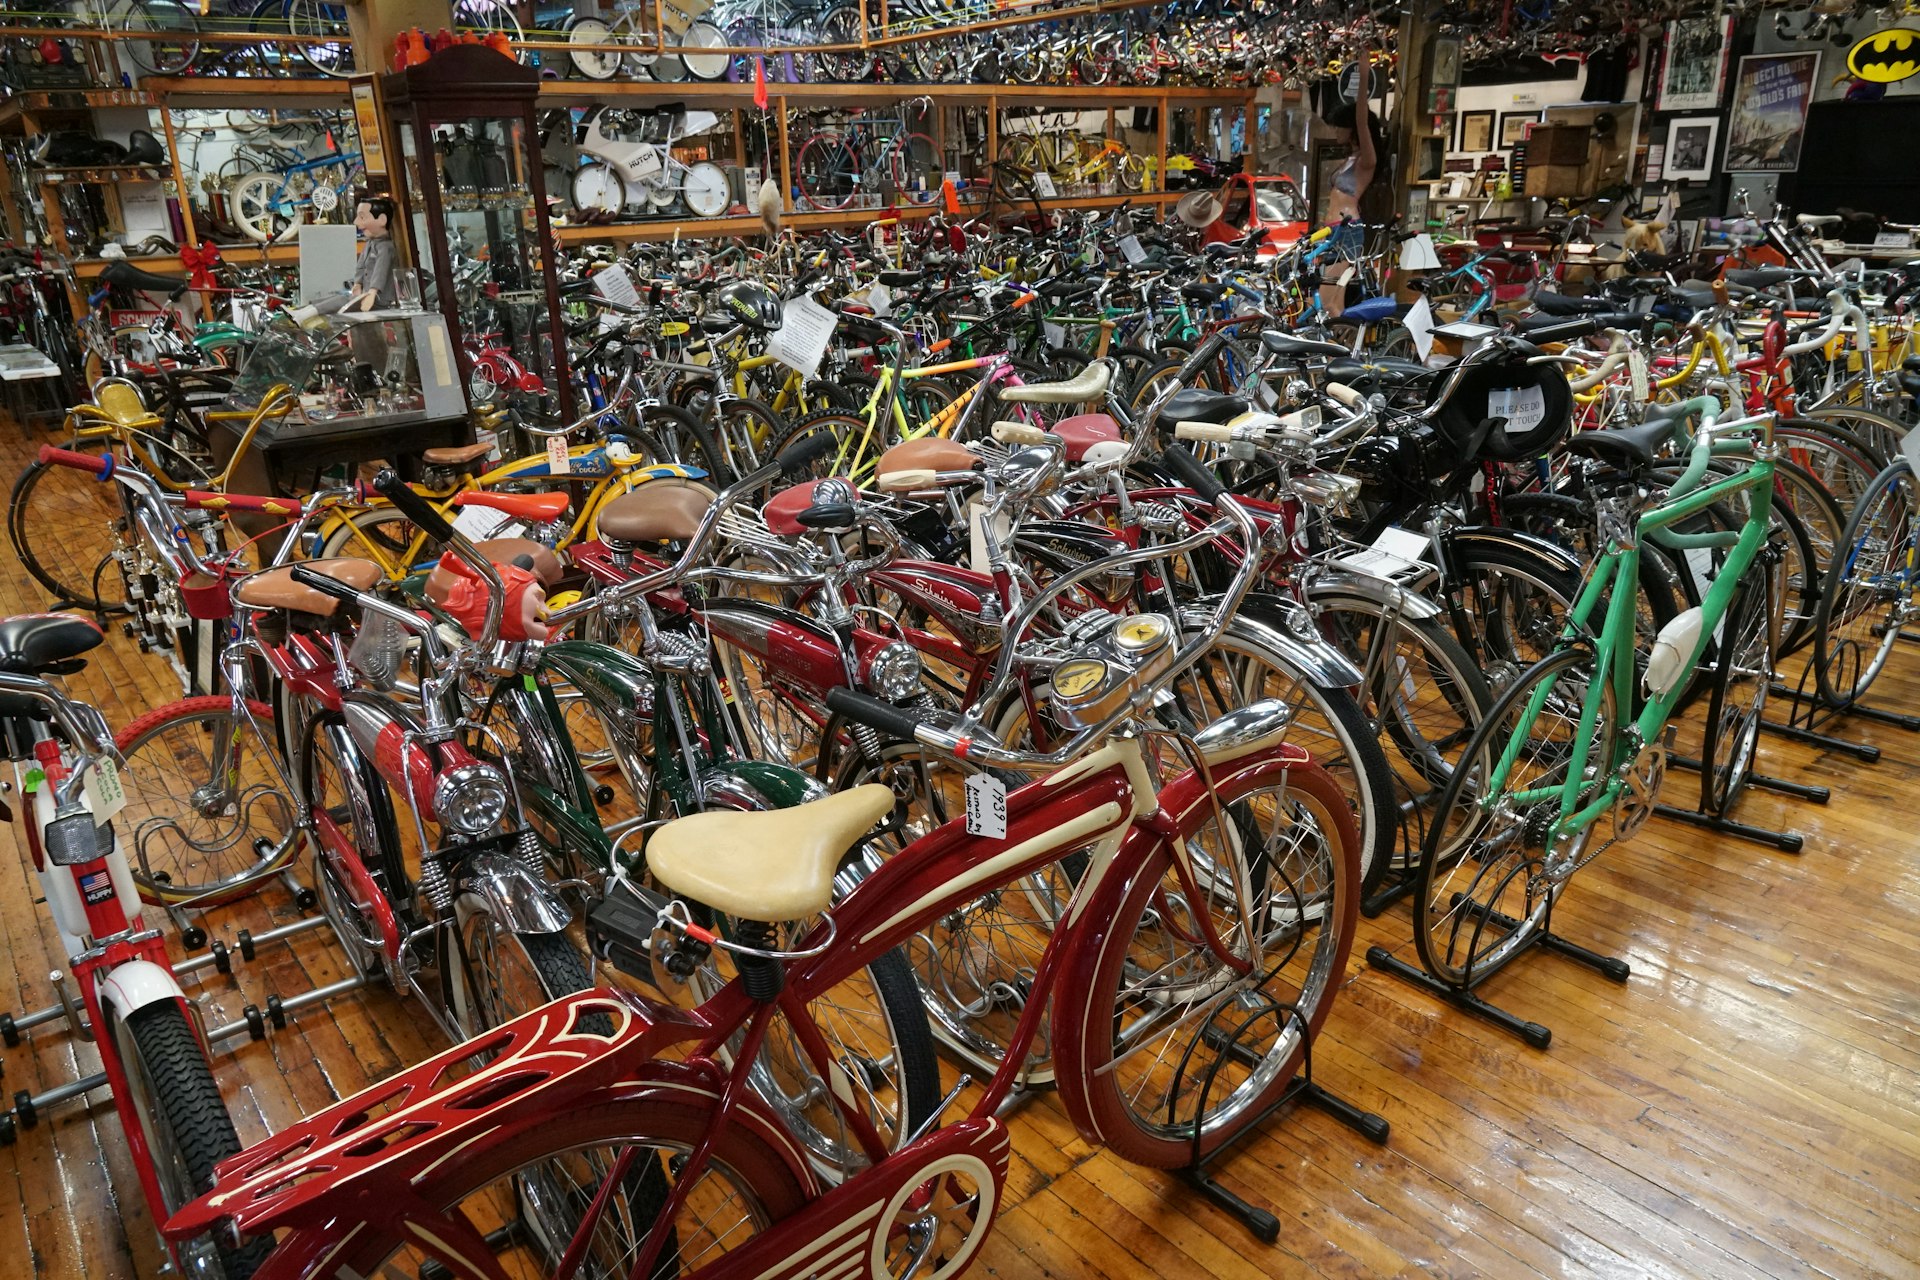 A collection of about 4,000 vintage bikes lined up at Bicycle Haven in Pittsburgh